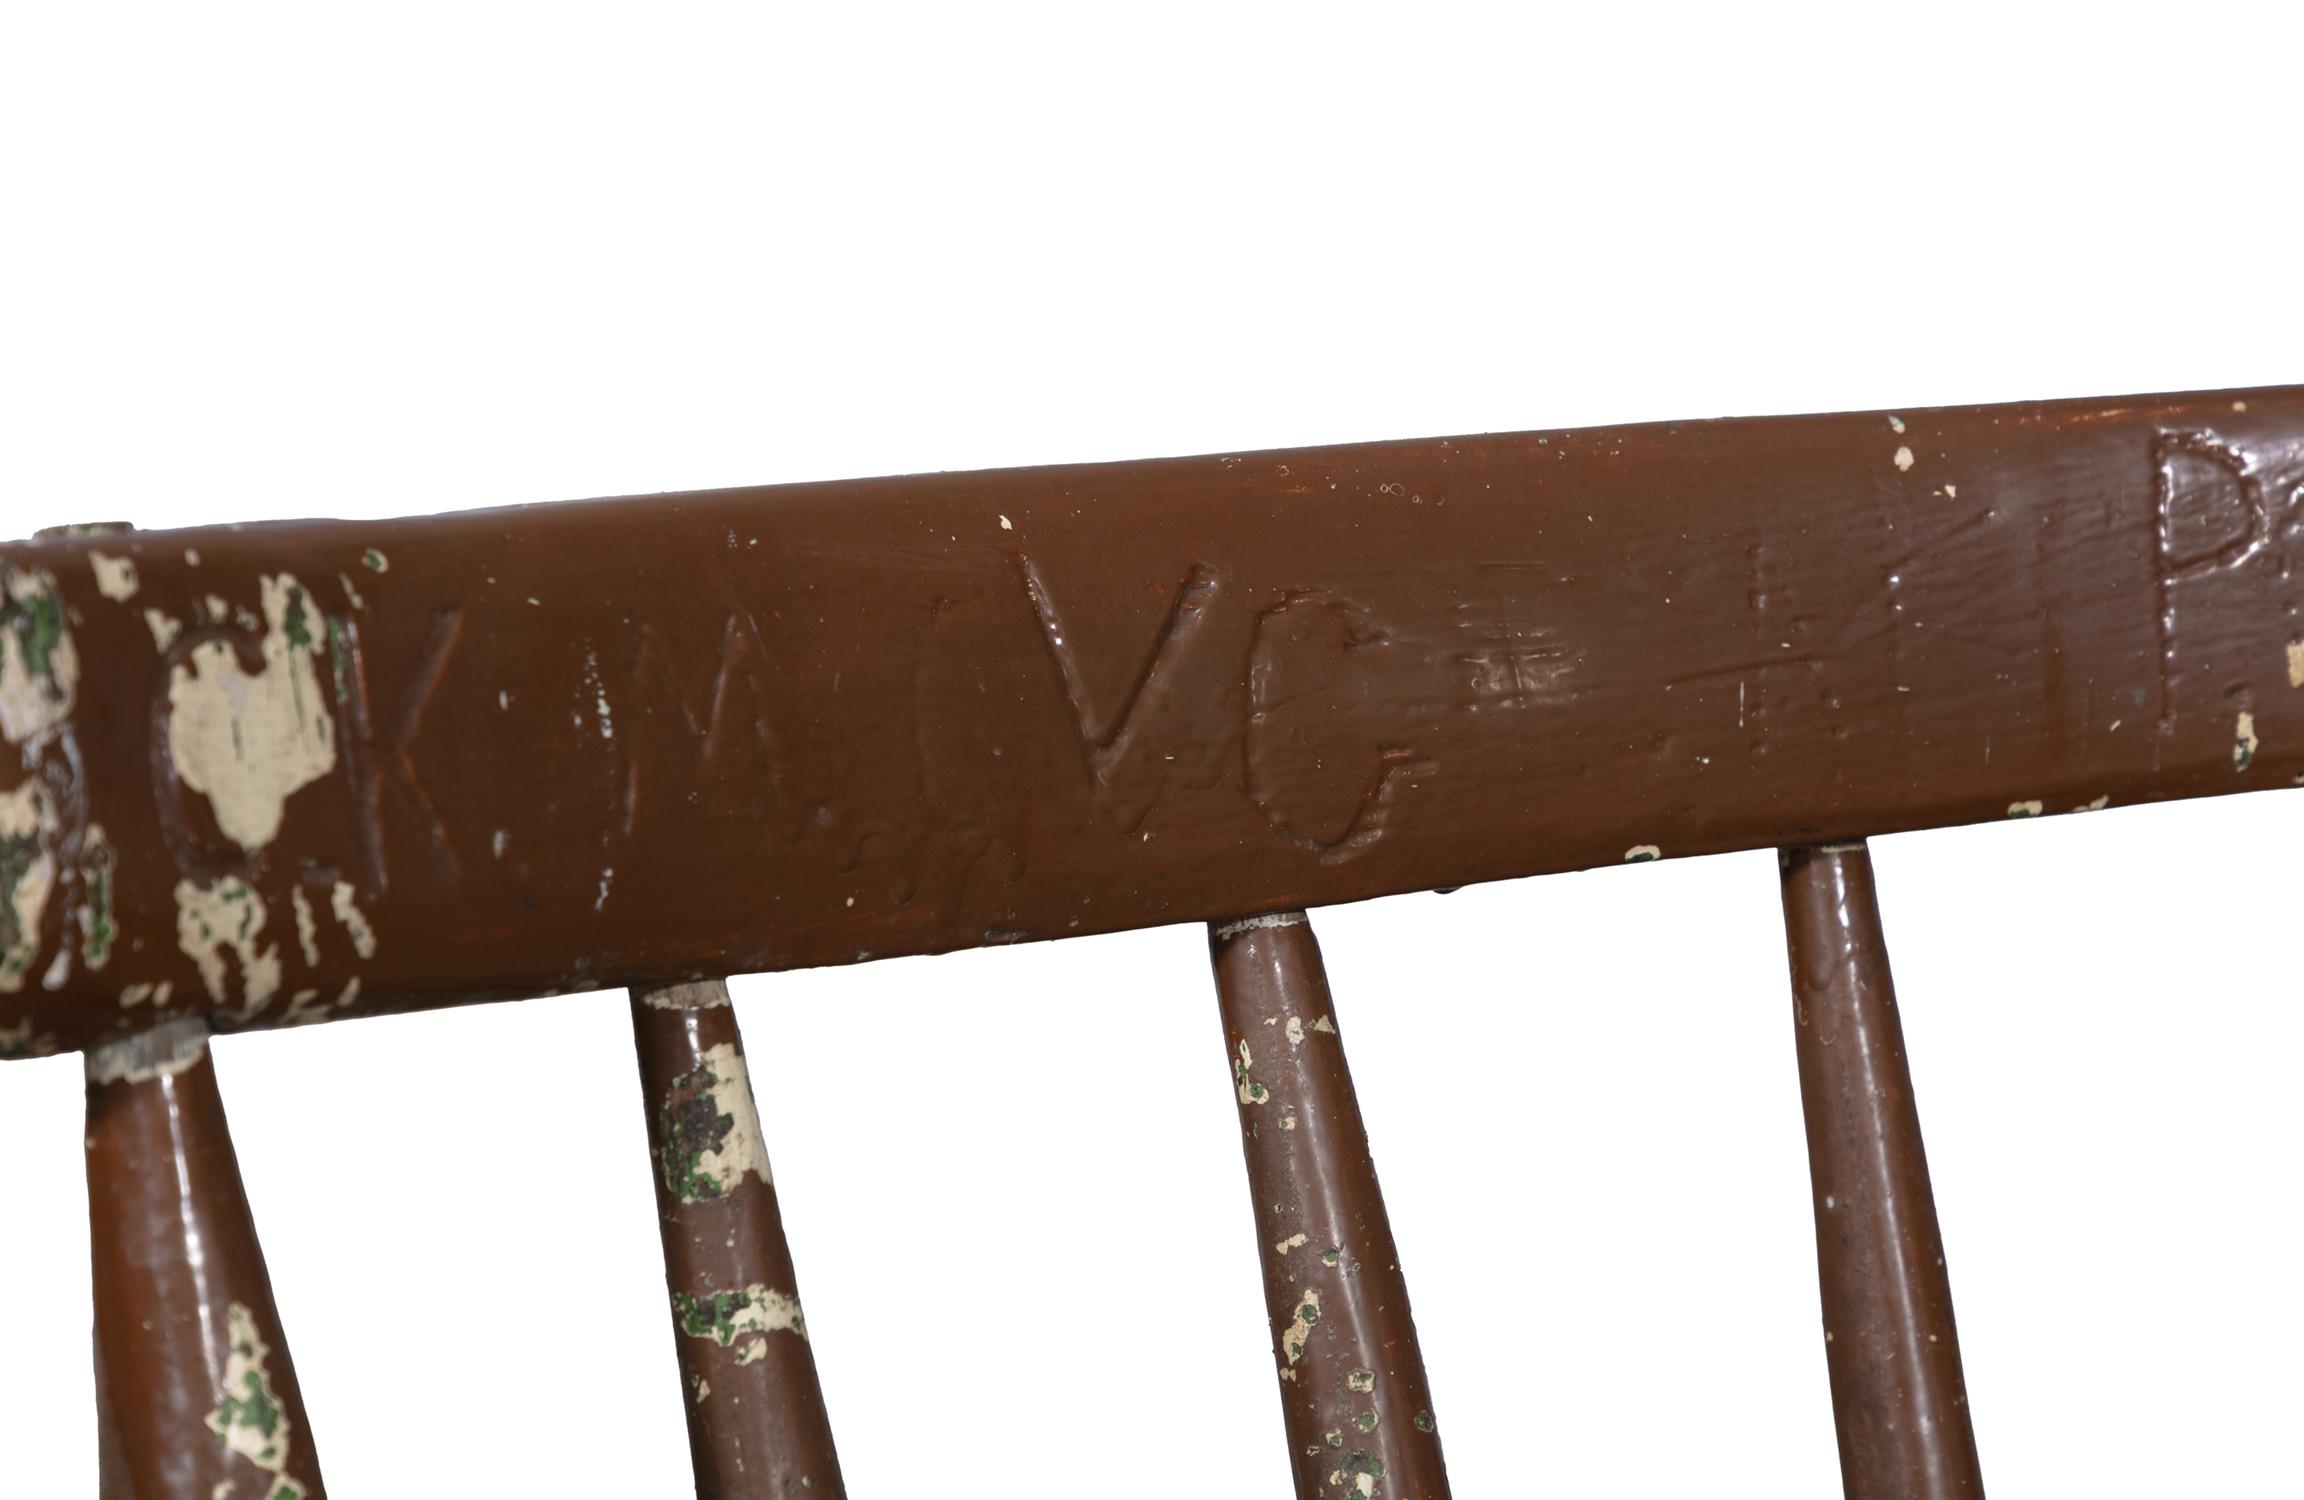 A PAINTED TIMBER HEDGE CHAIR the carved rail back with inscribed initials on spindles with plain - Image 3 of 3